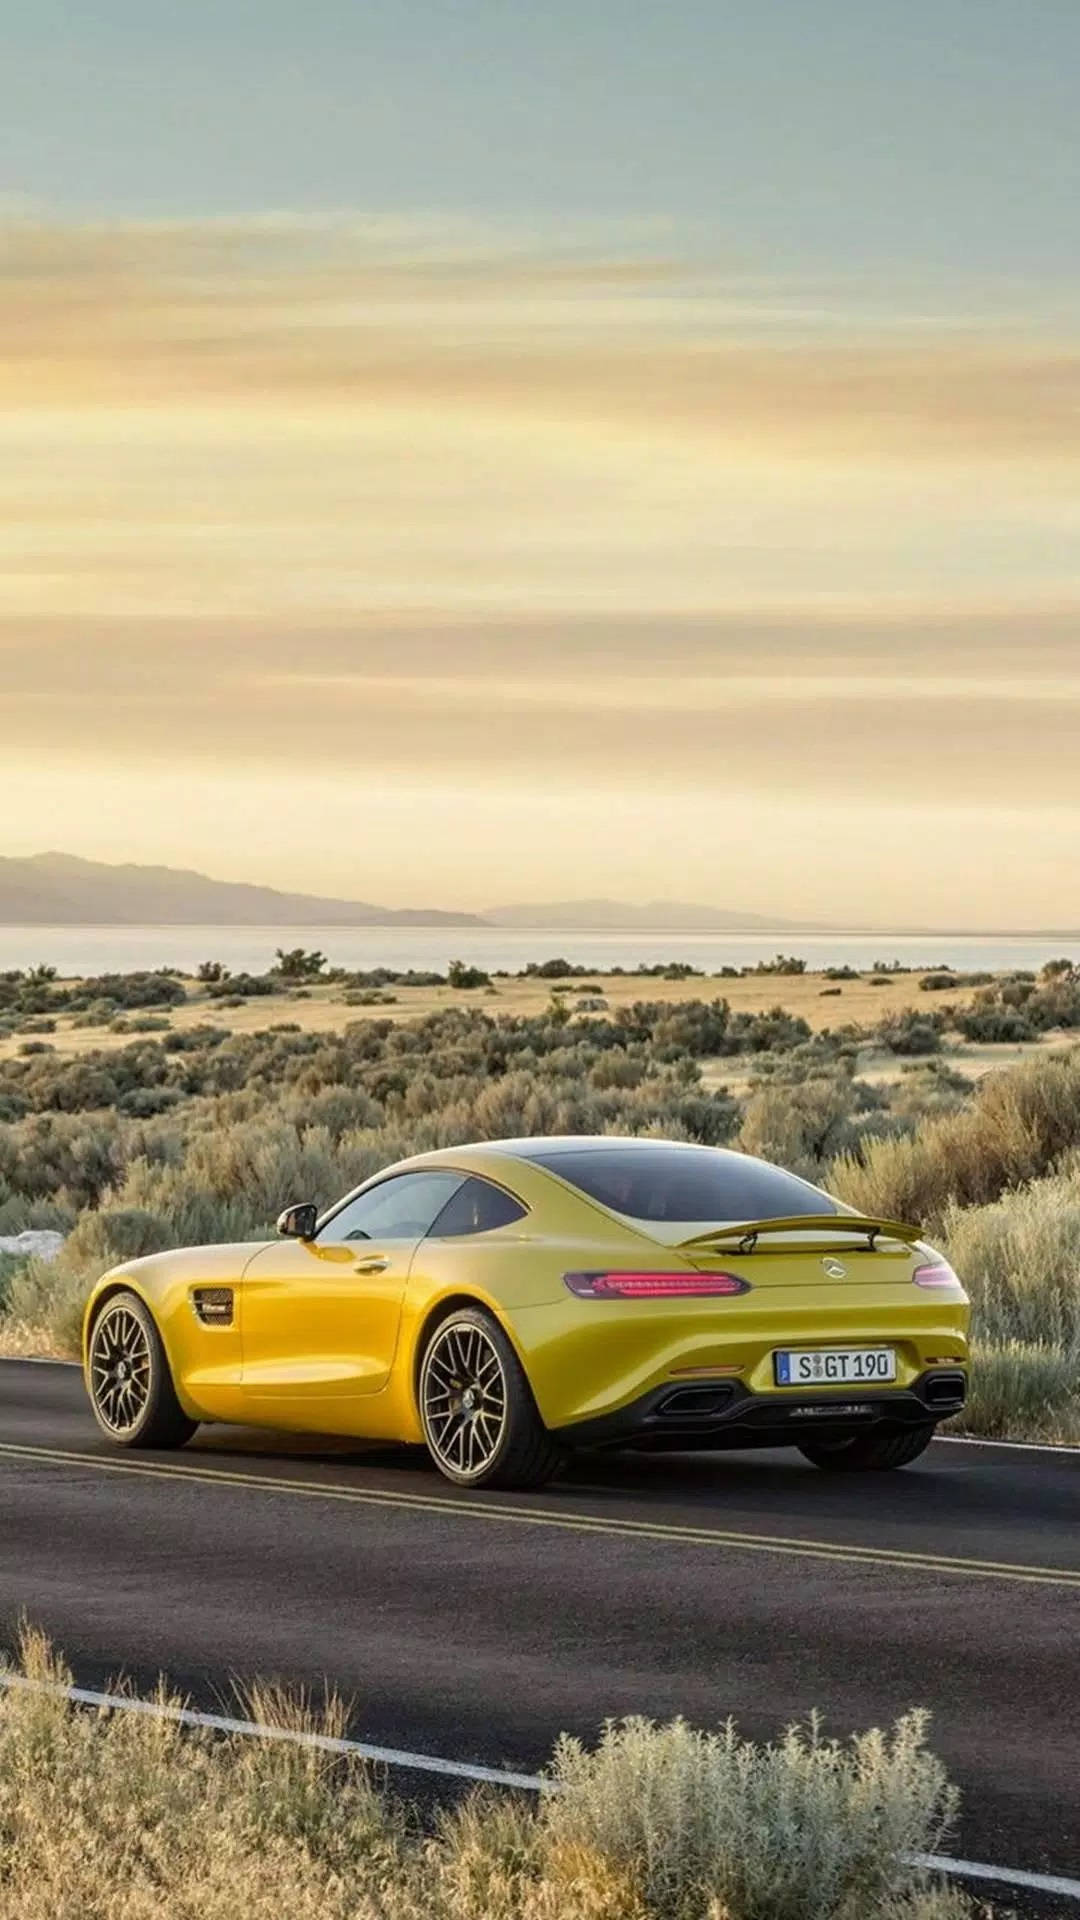 Exquisite Mercedes-amg Gt With Iphone X Entrenched In The Interior